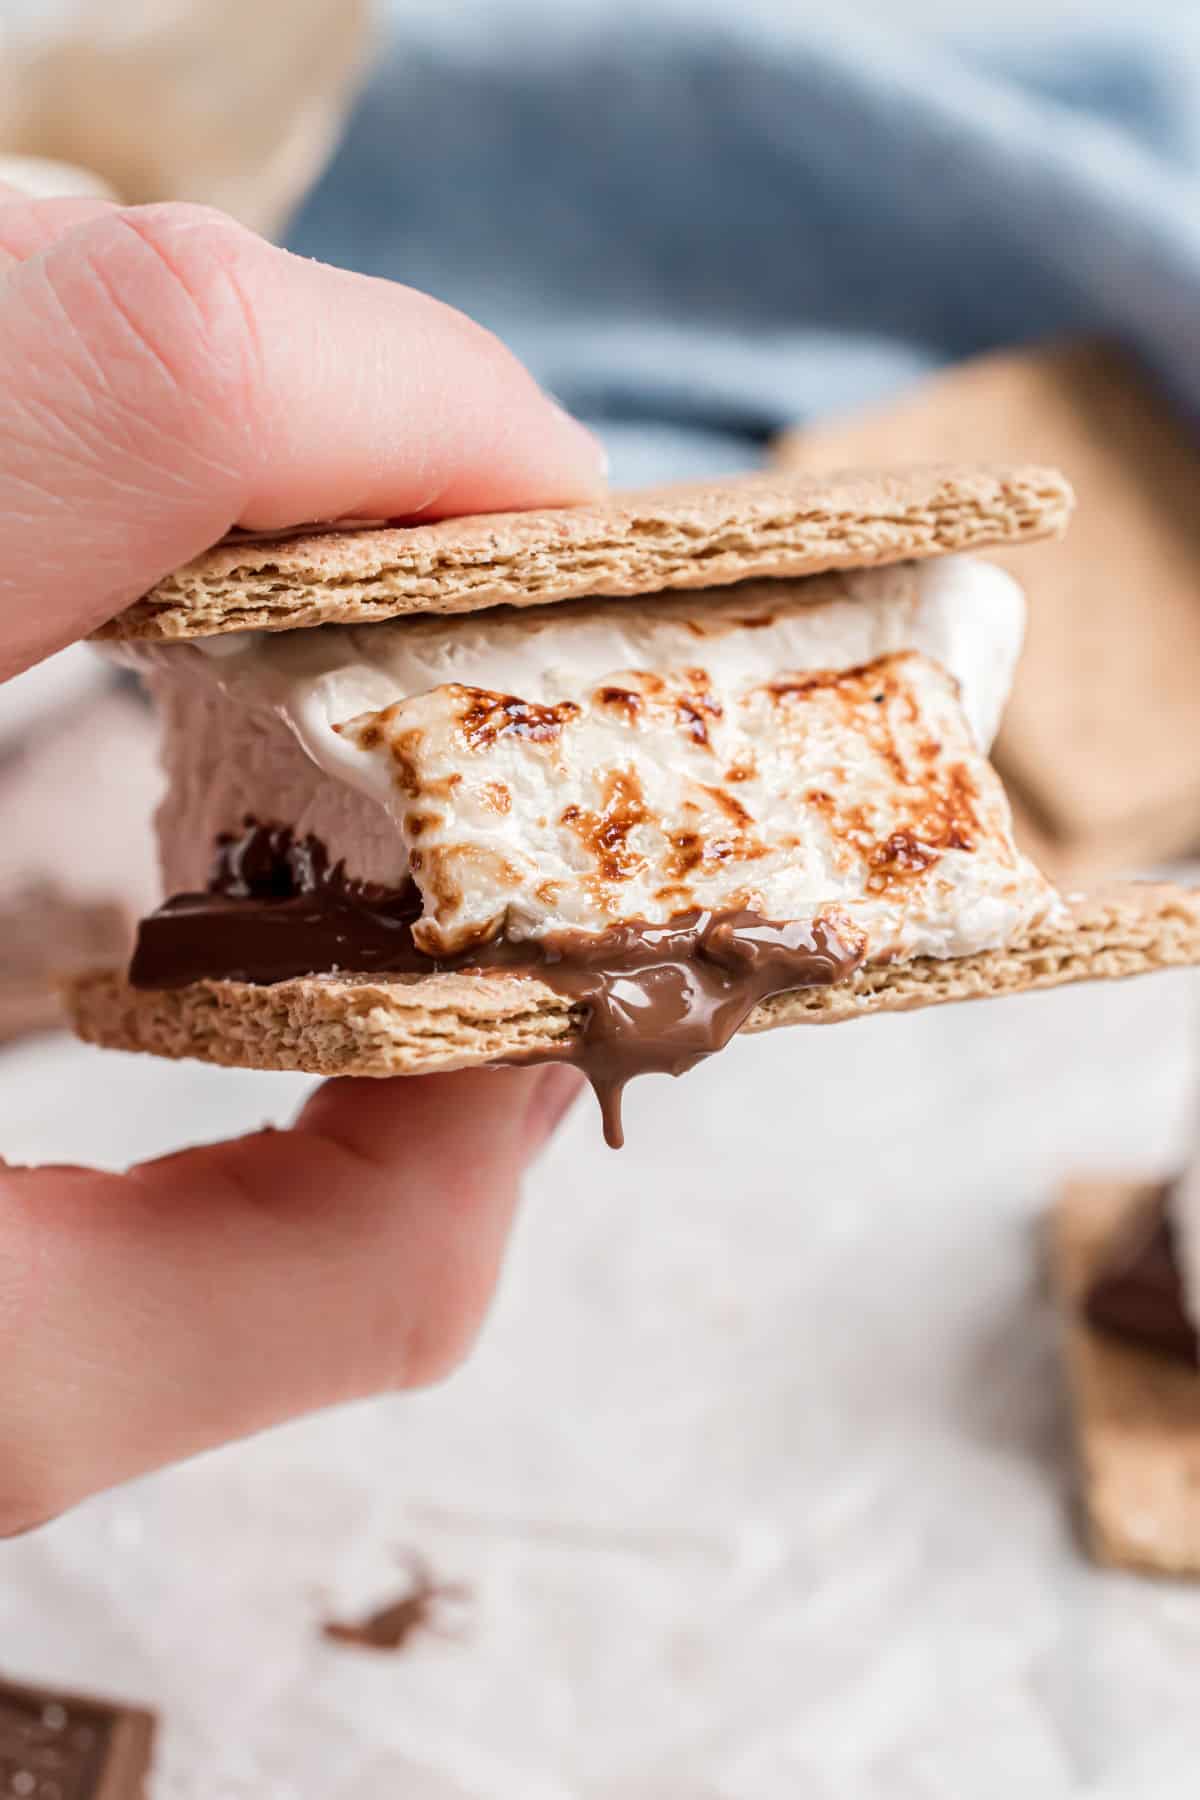 Homemade marshmallows in a gooey warm s'mores.